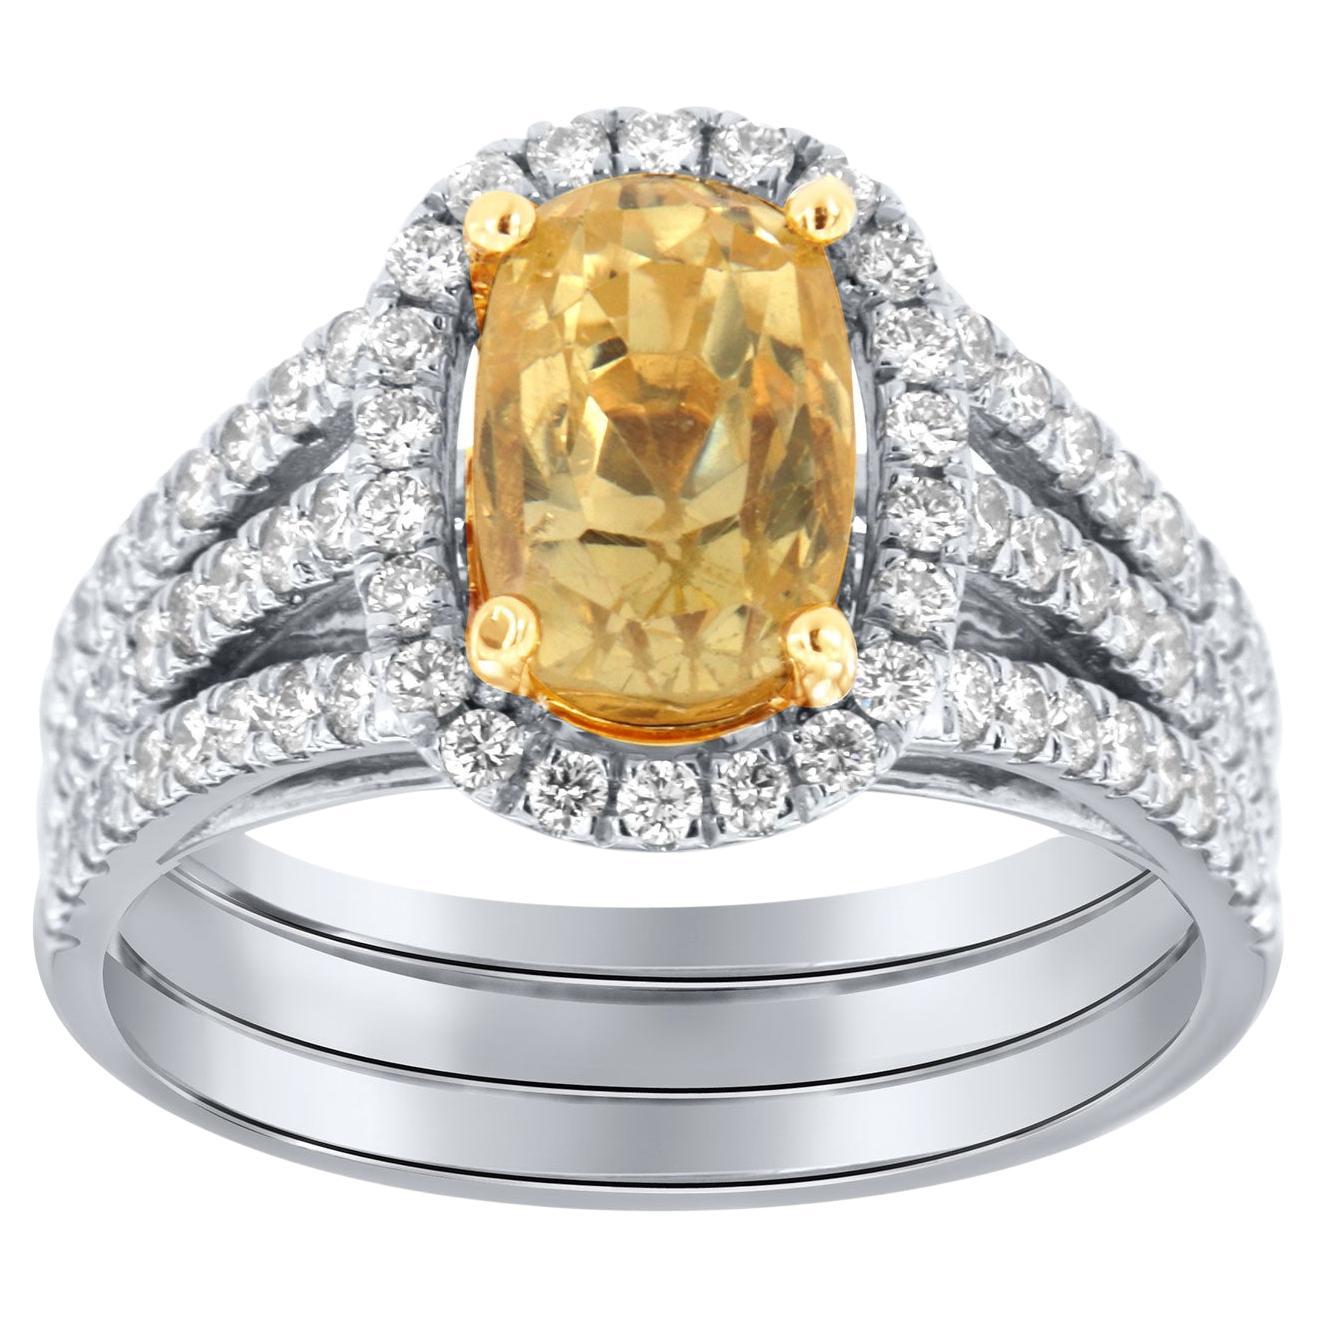 GIA Certified 3.26 Carat Antique Cushion Yellow Sapphire Halo Diamond Ring For Sale